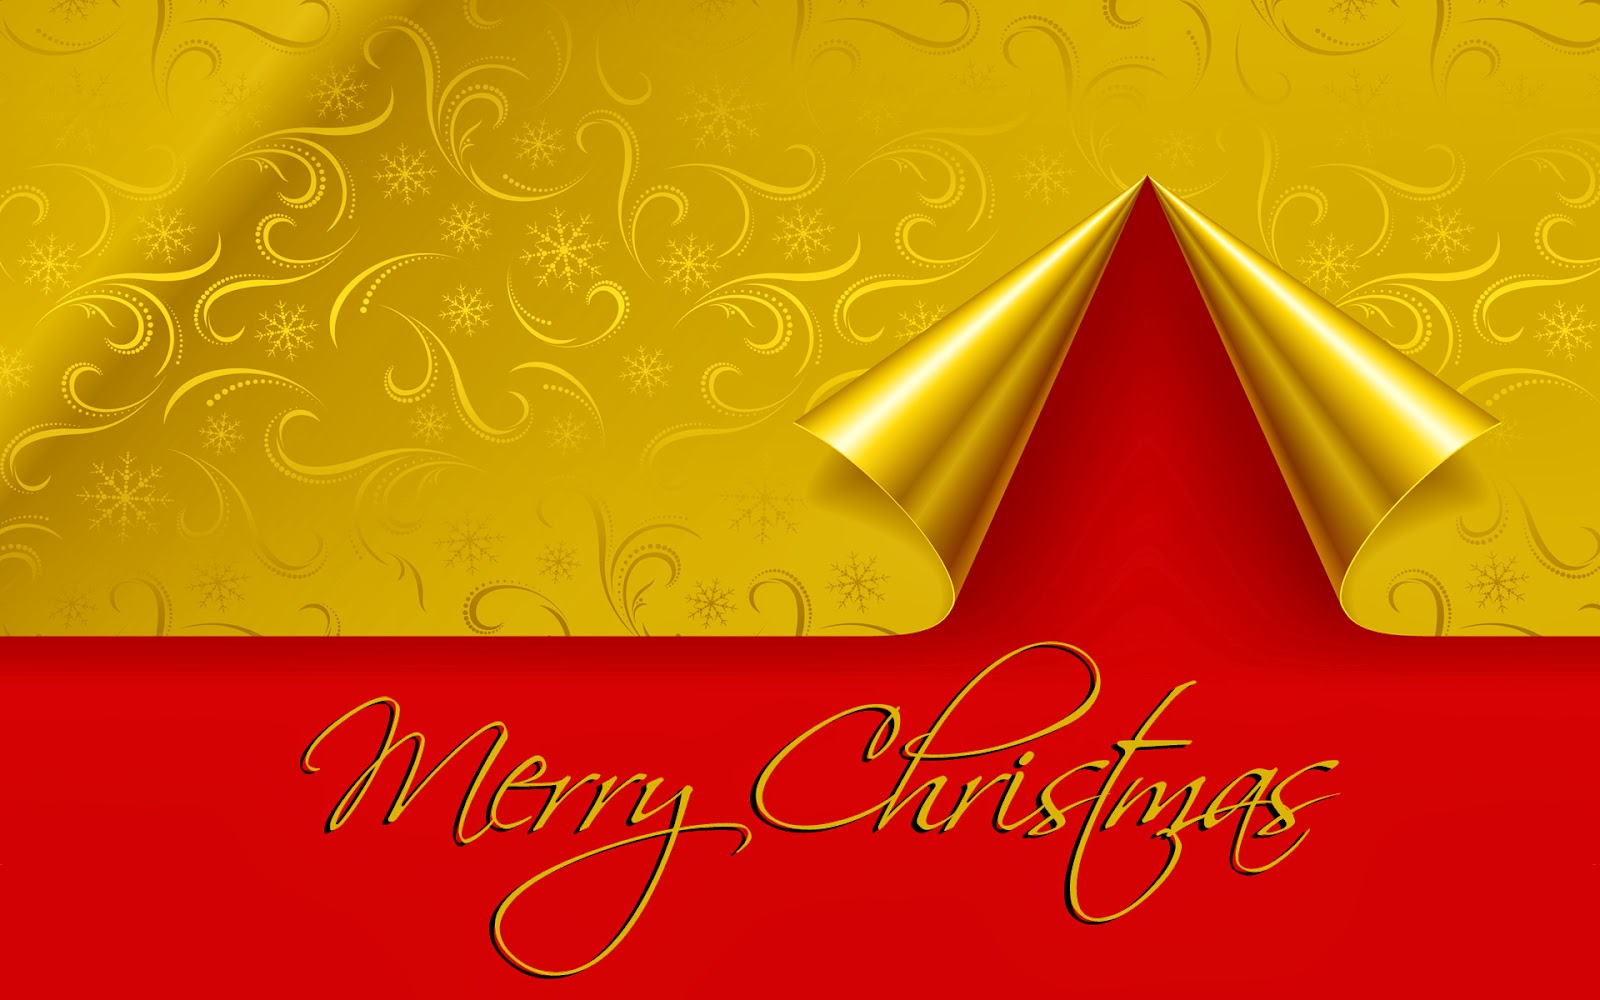 Christmas Greeting Card Messages HD Wallpaper